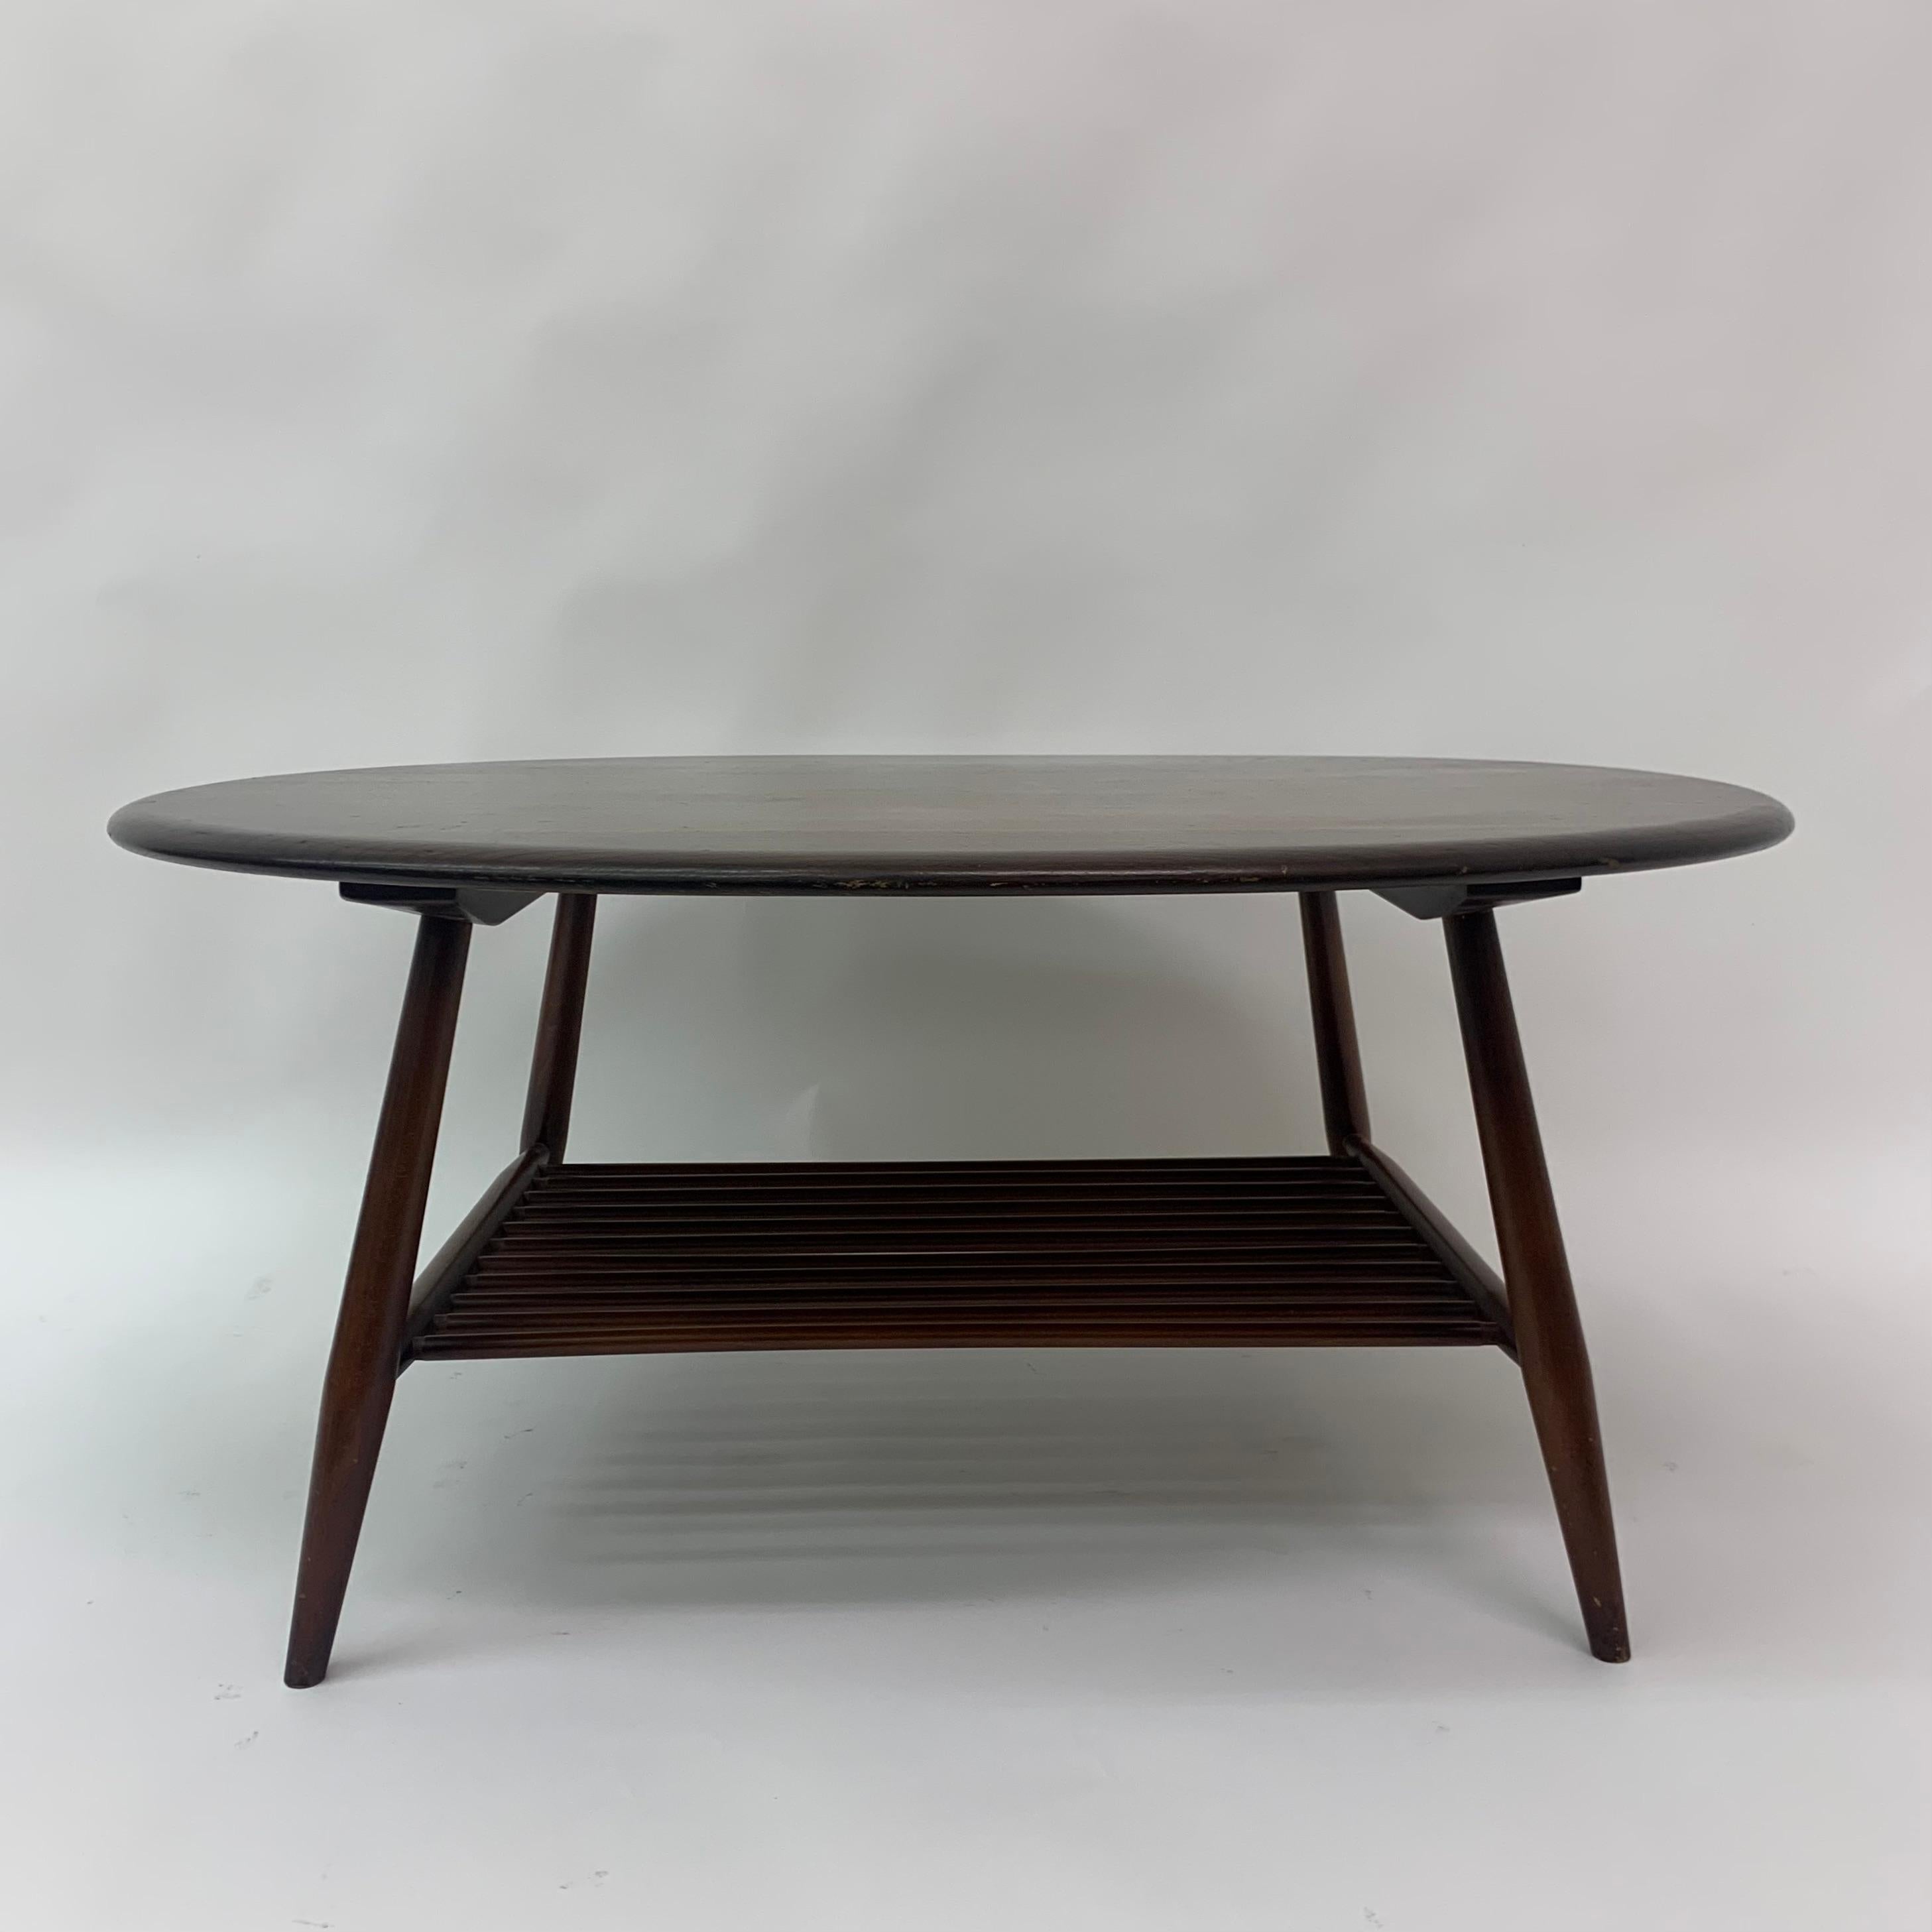 Large oval coffee table by Lucian Randolph Ercolani for Ercol, England, 1950s.